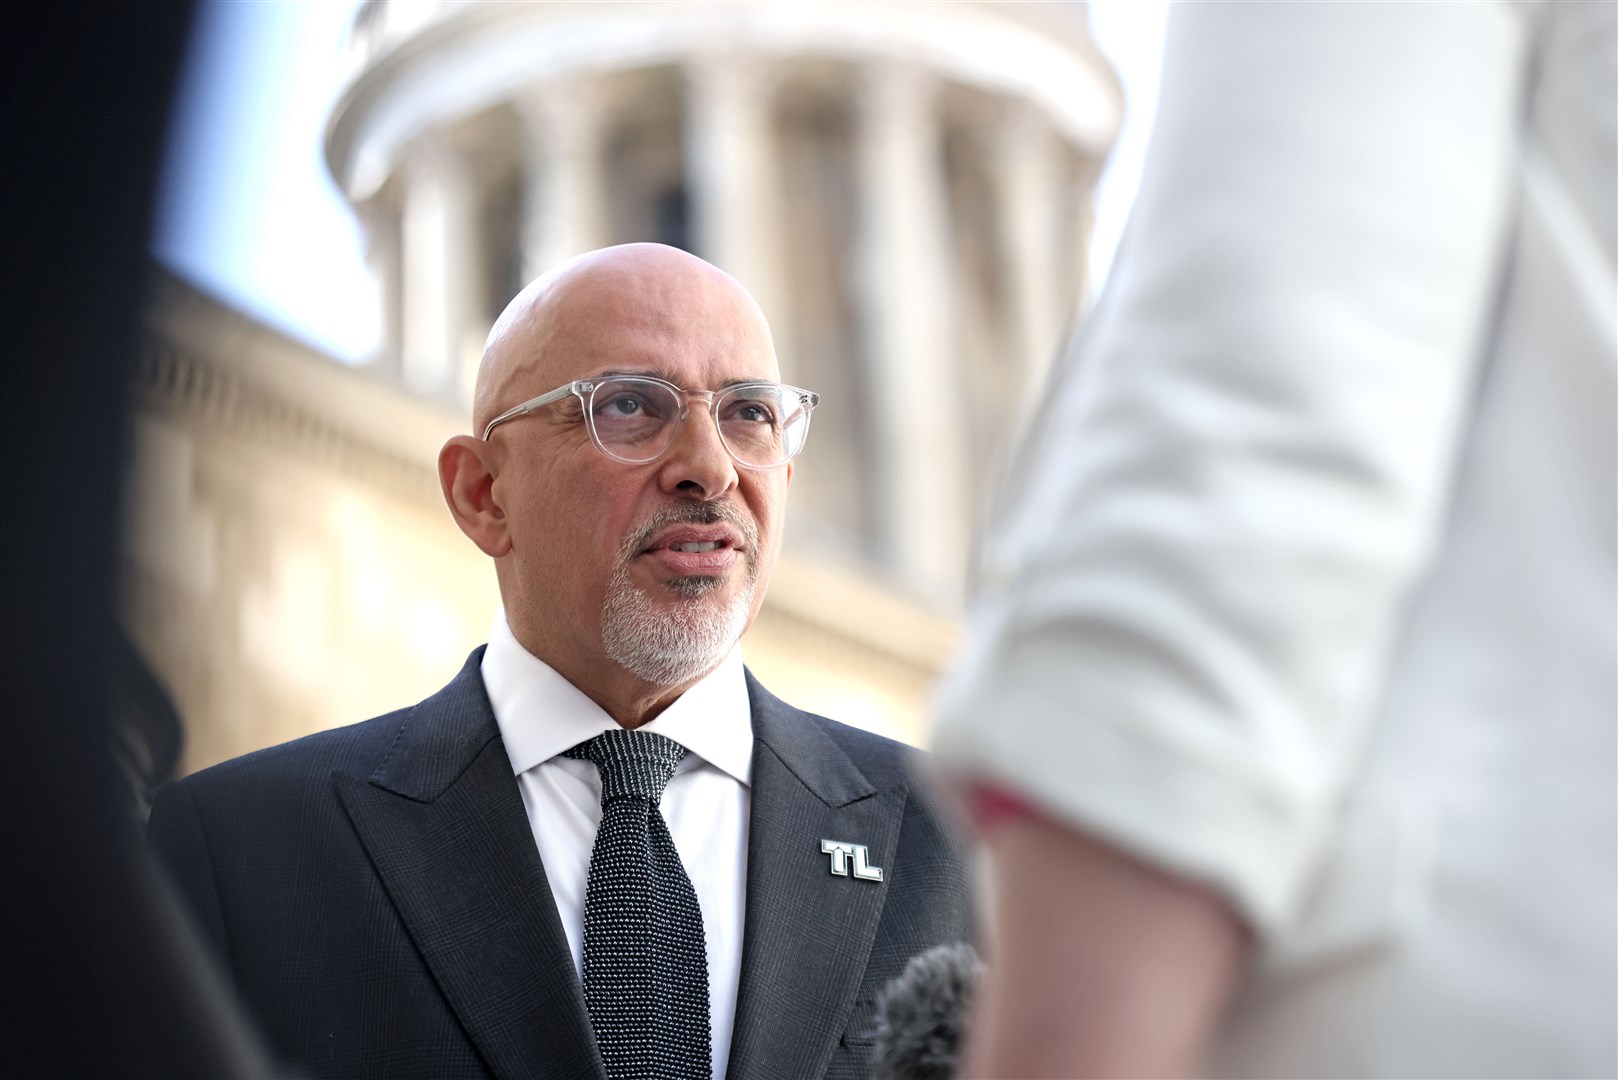 Nadhim Zahawi said he had not asked No 10 who called the meeting because he did not deem it necessary (James Manning/PA)